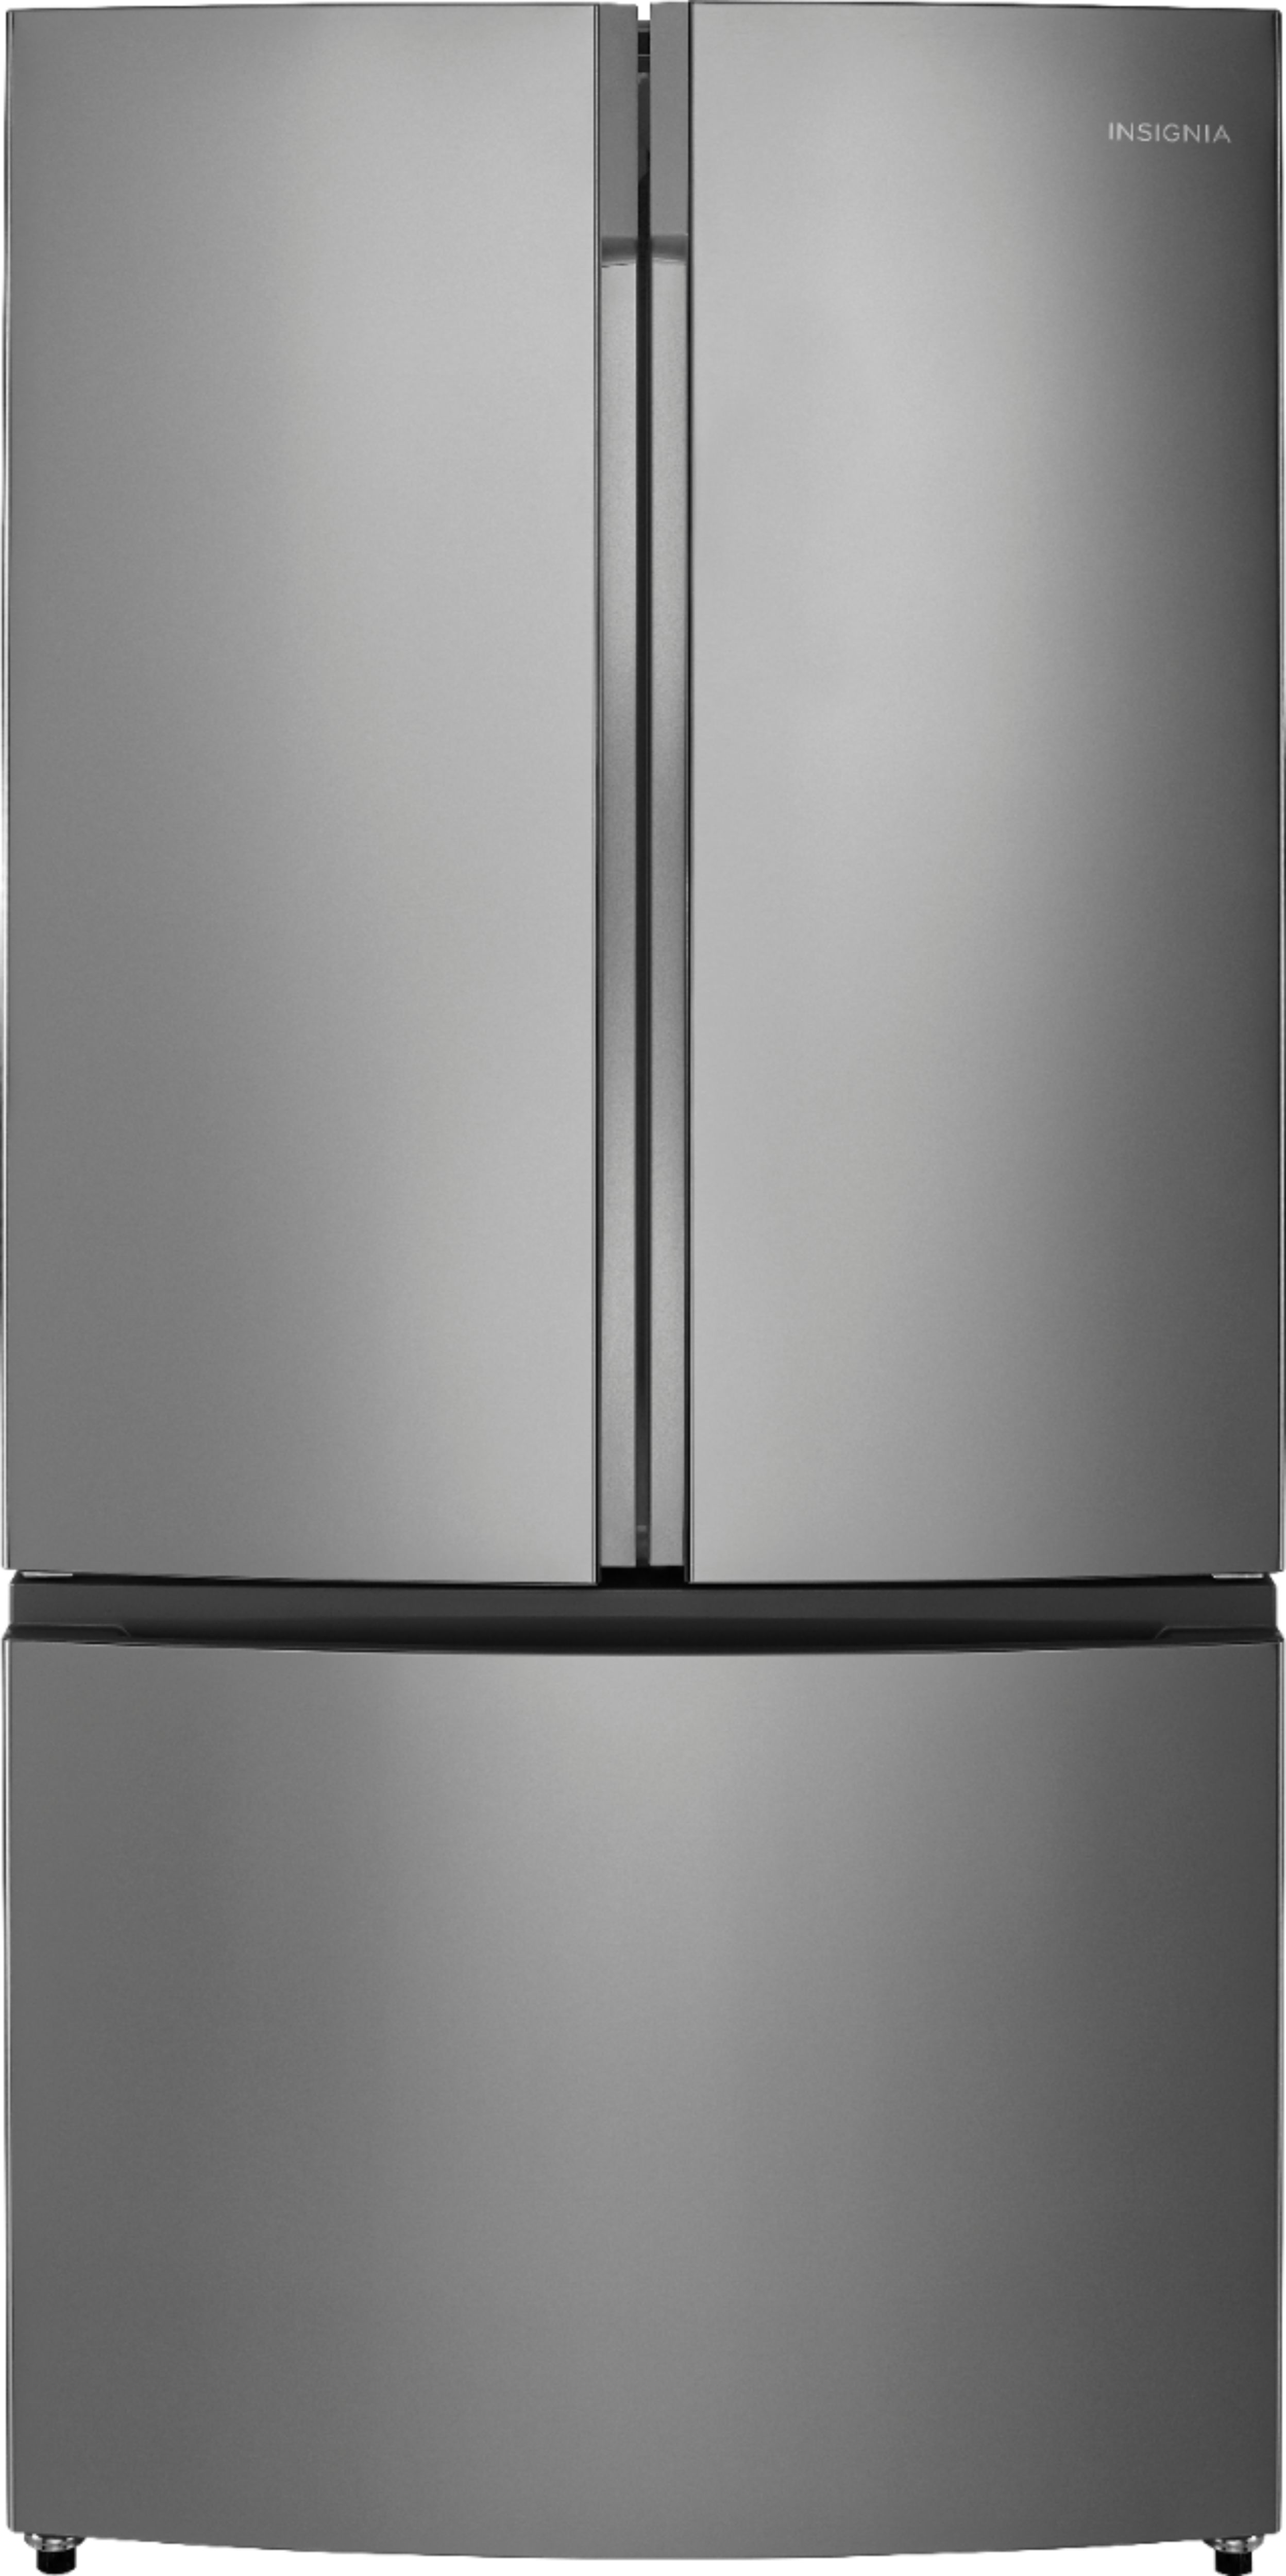 Insignia™ - 26.6 Cu. Ft. French Door Refrigerator - Stainless steel at